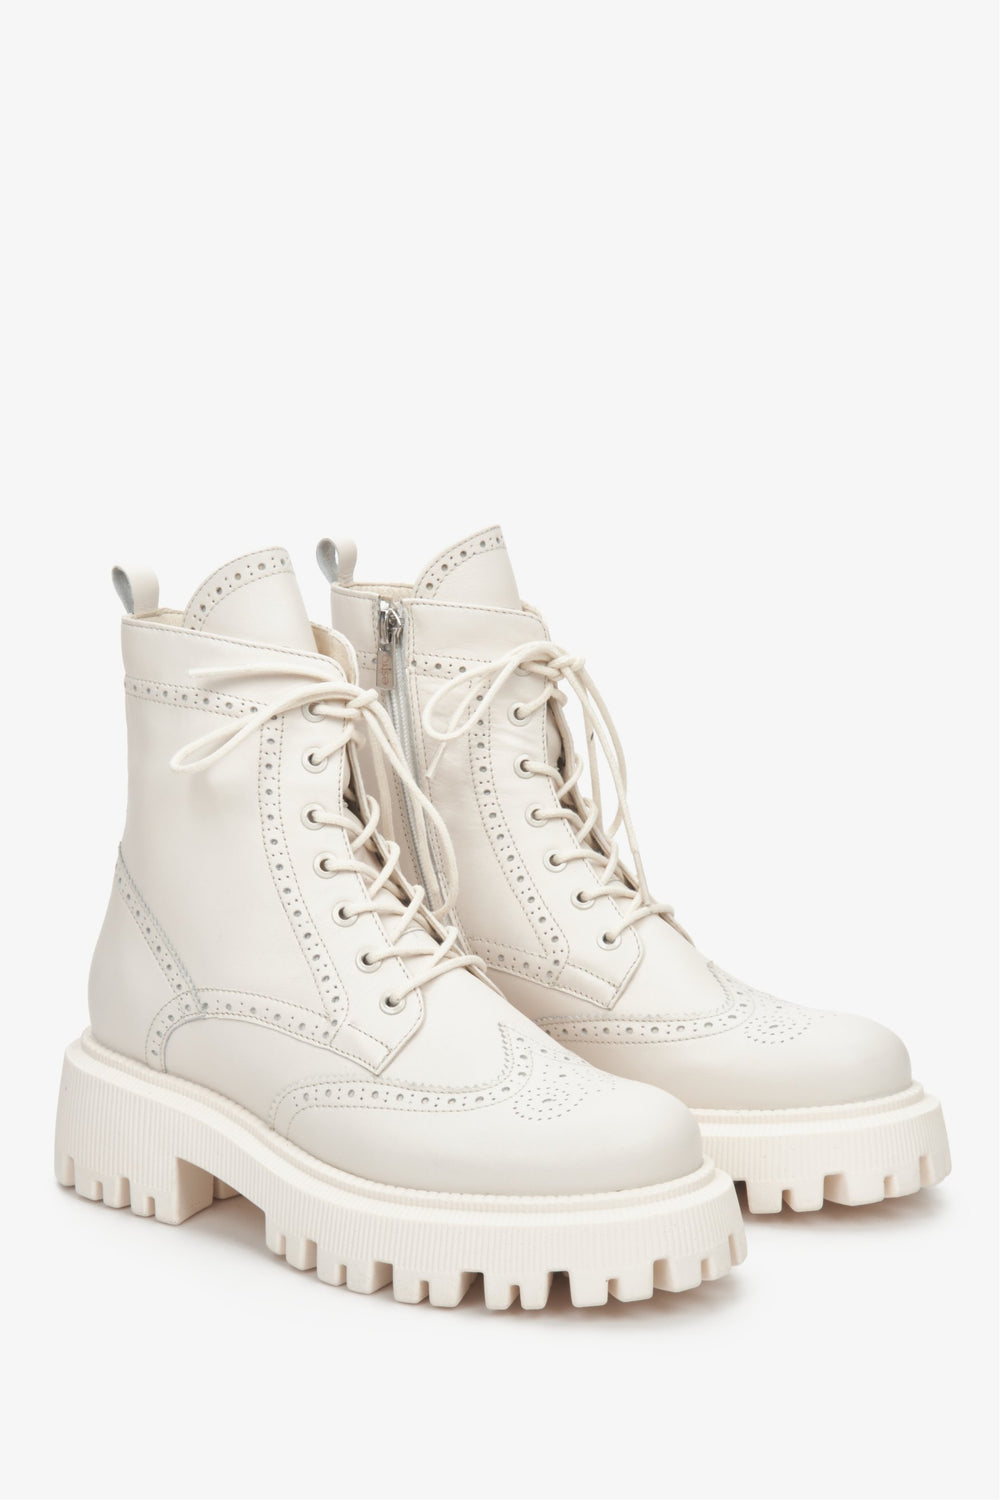 Women's White Ankle Boots with Laces made of Genuine Leather Estro ER00110133.